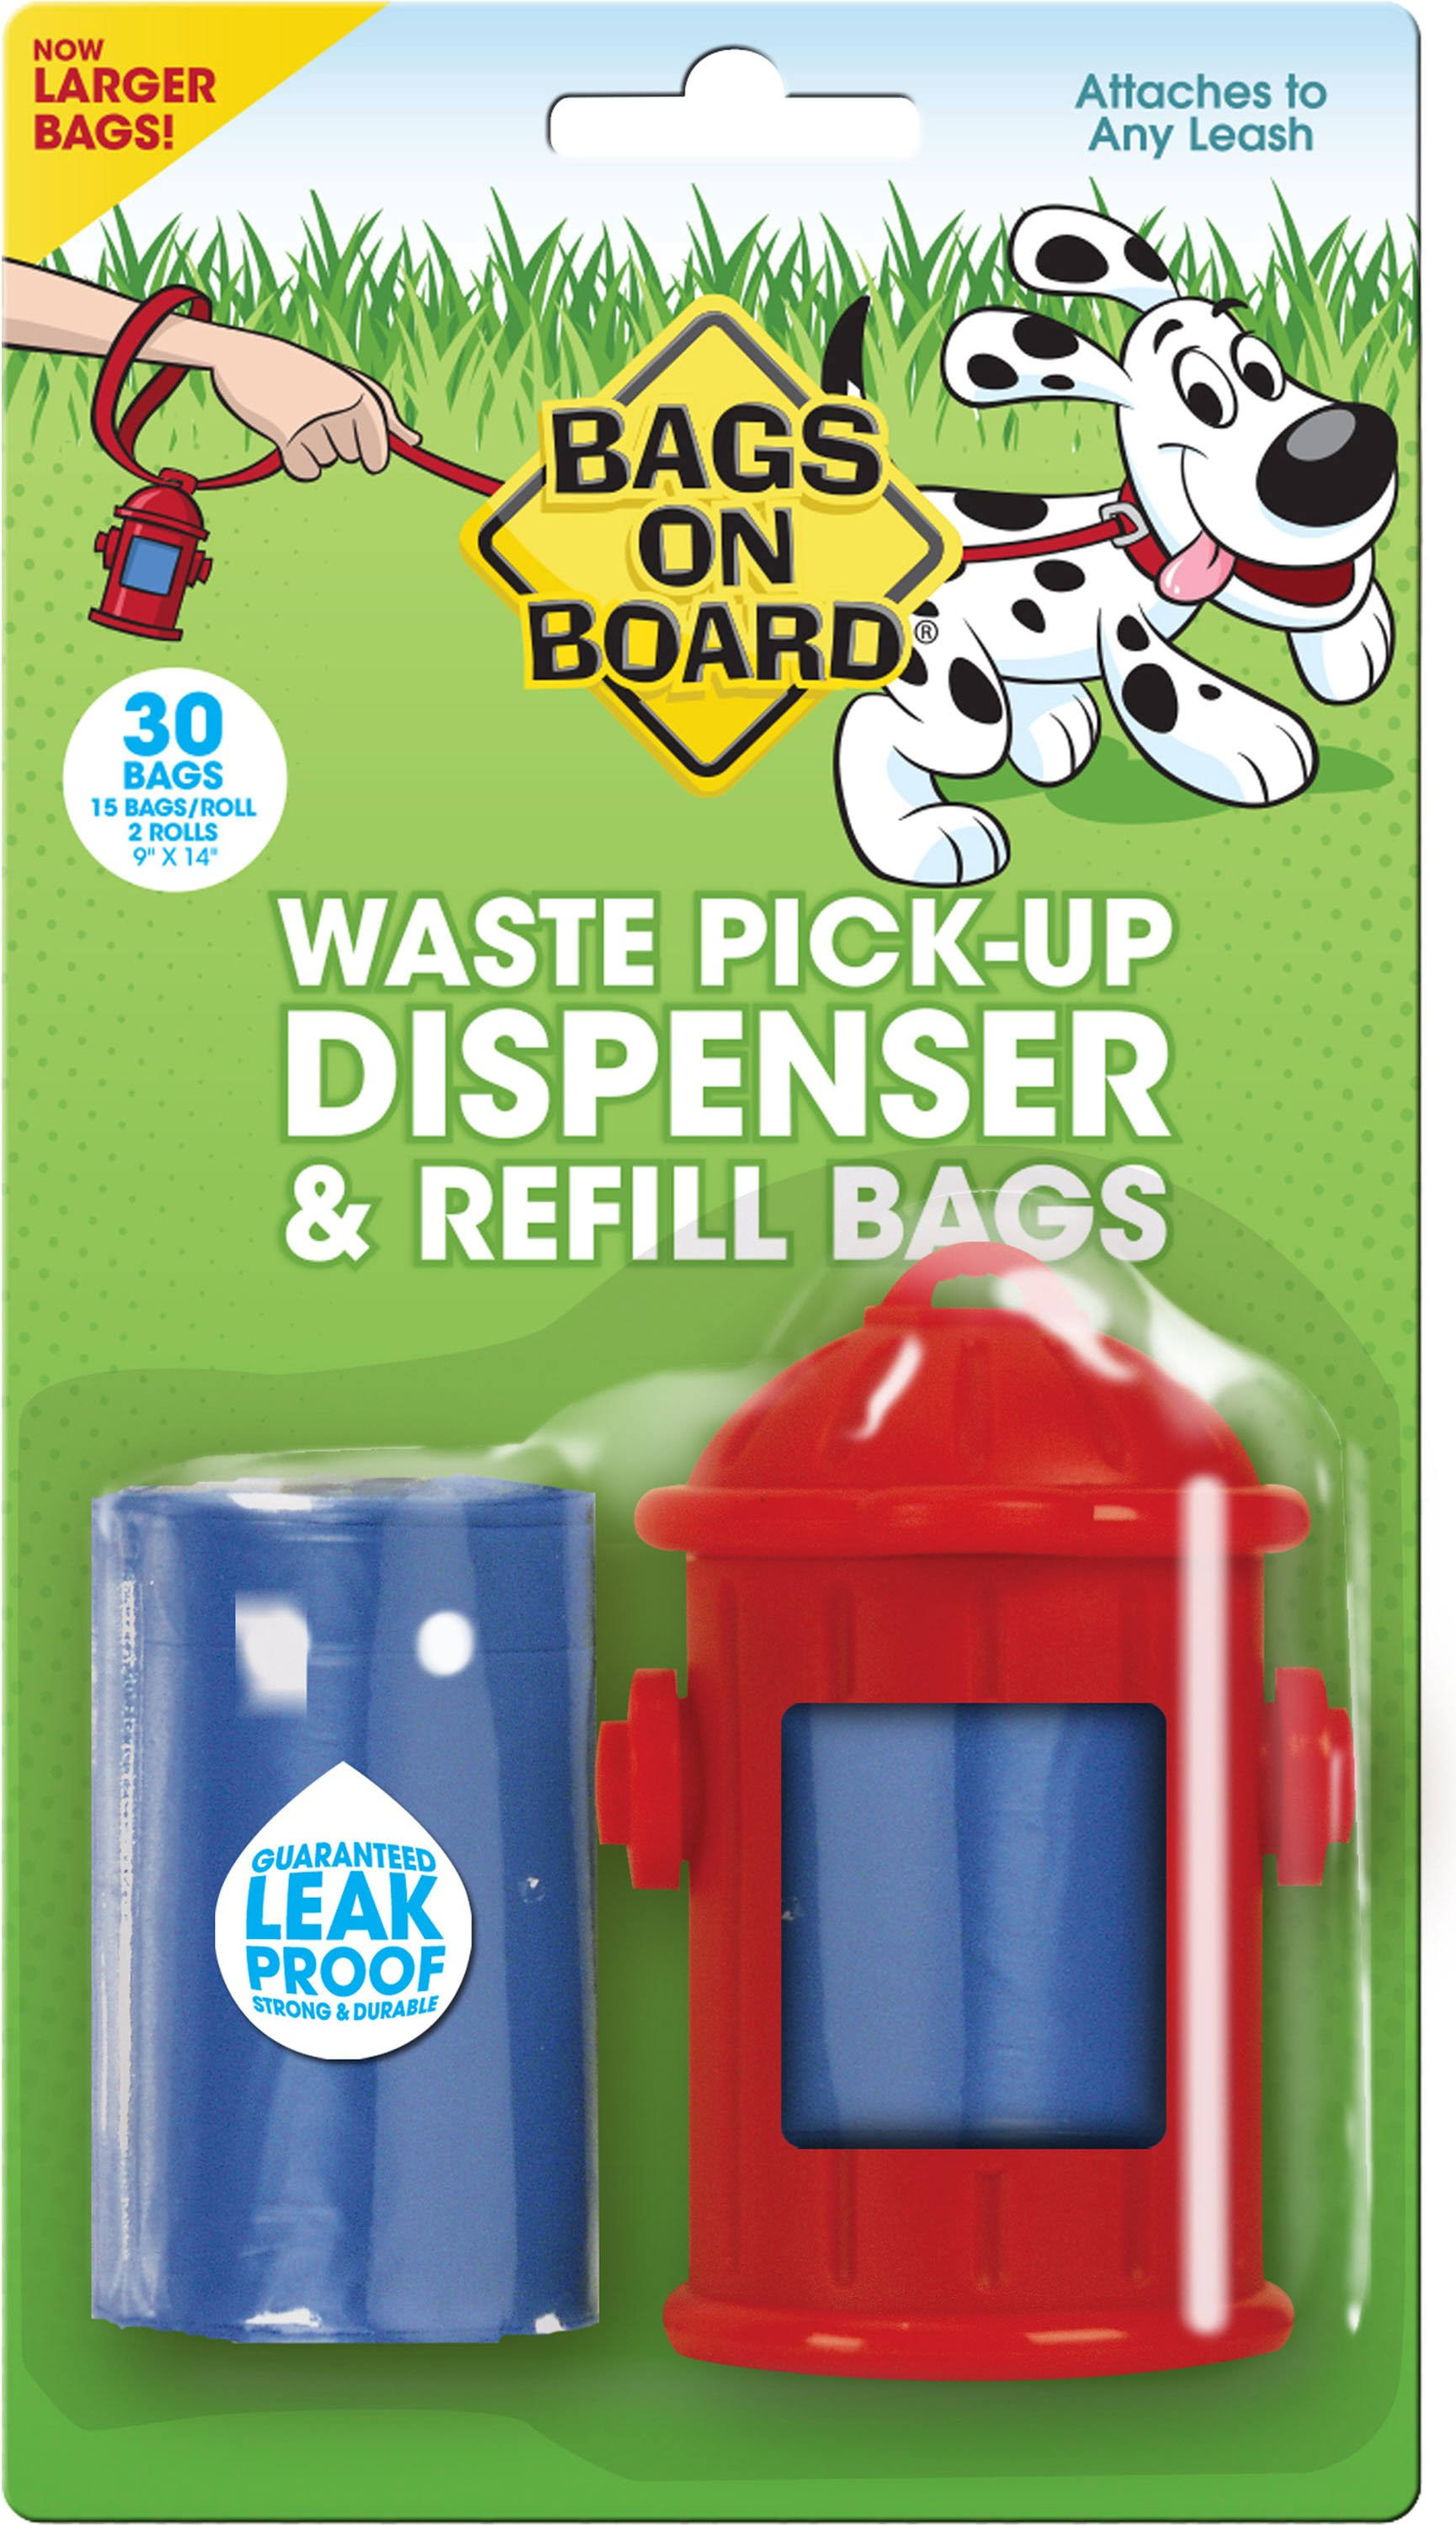 Bags on Board Fire Hydrant Style Dog Waste Bag Dispenser with 30 Refill Bags